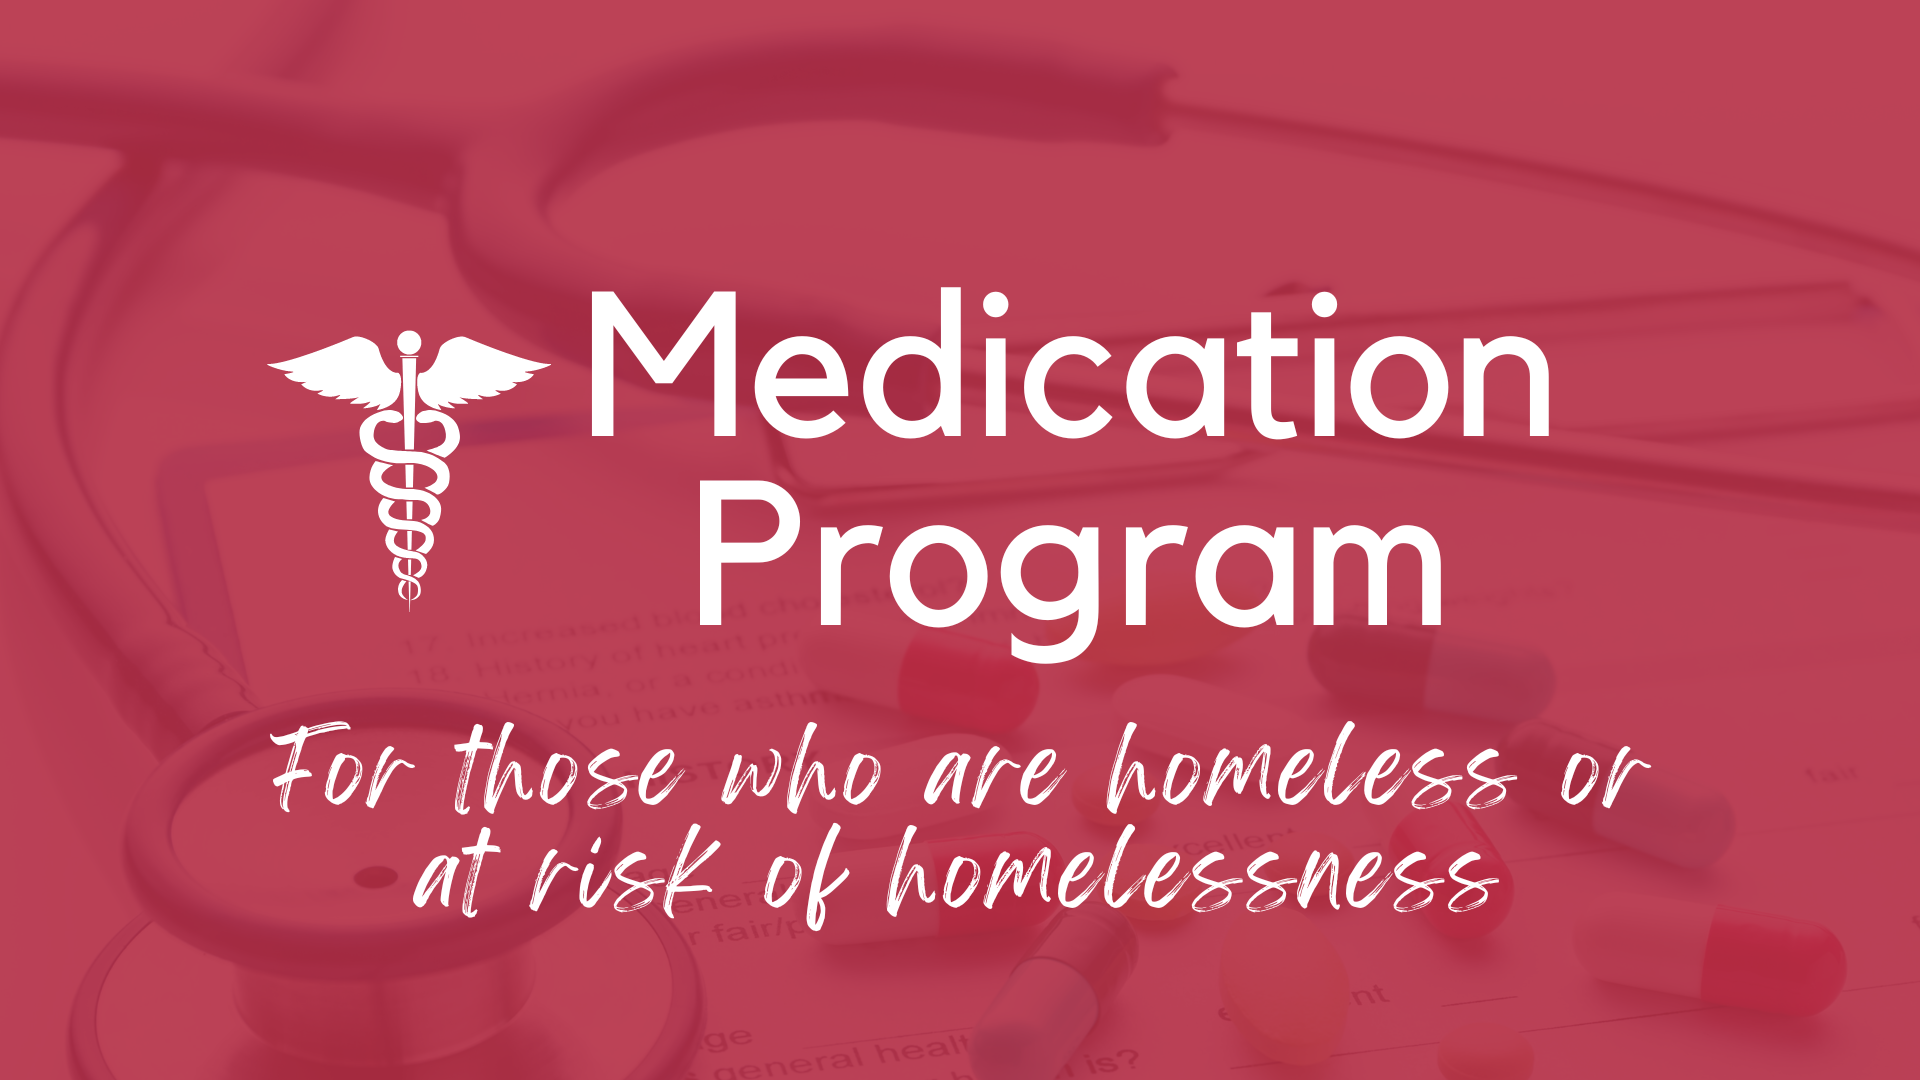 Medication Program For Those Who Are Homeless Or At Risk Of Homelessness